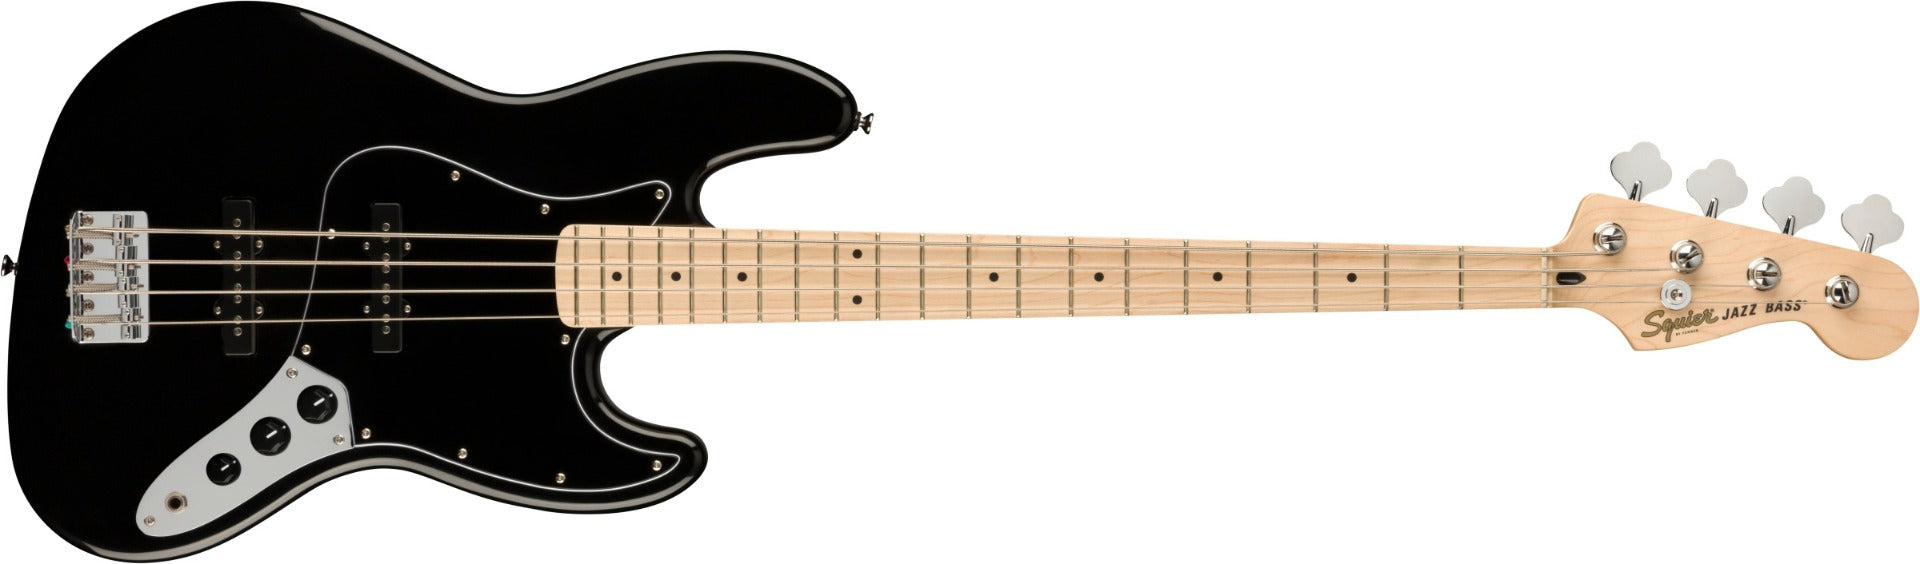 Squier Affinity Jazz Bass - Maple, Black front